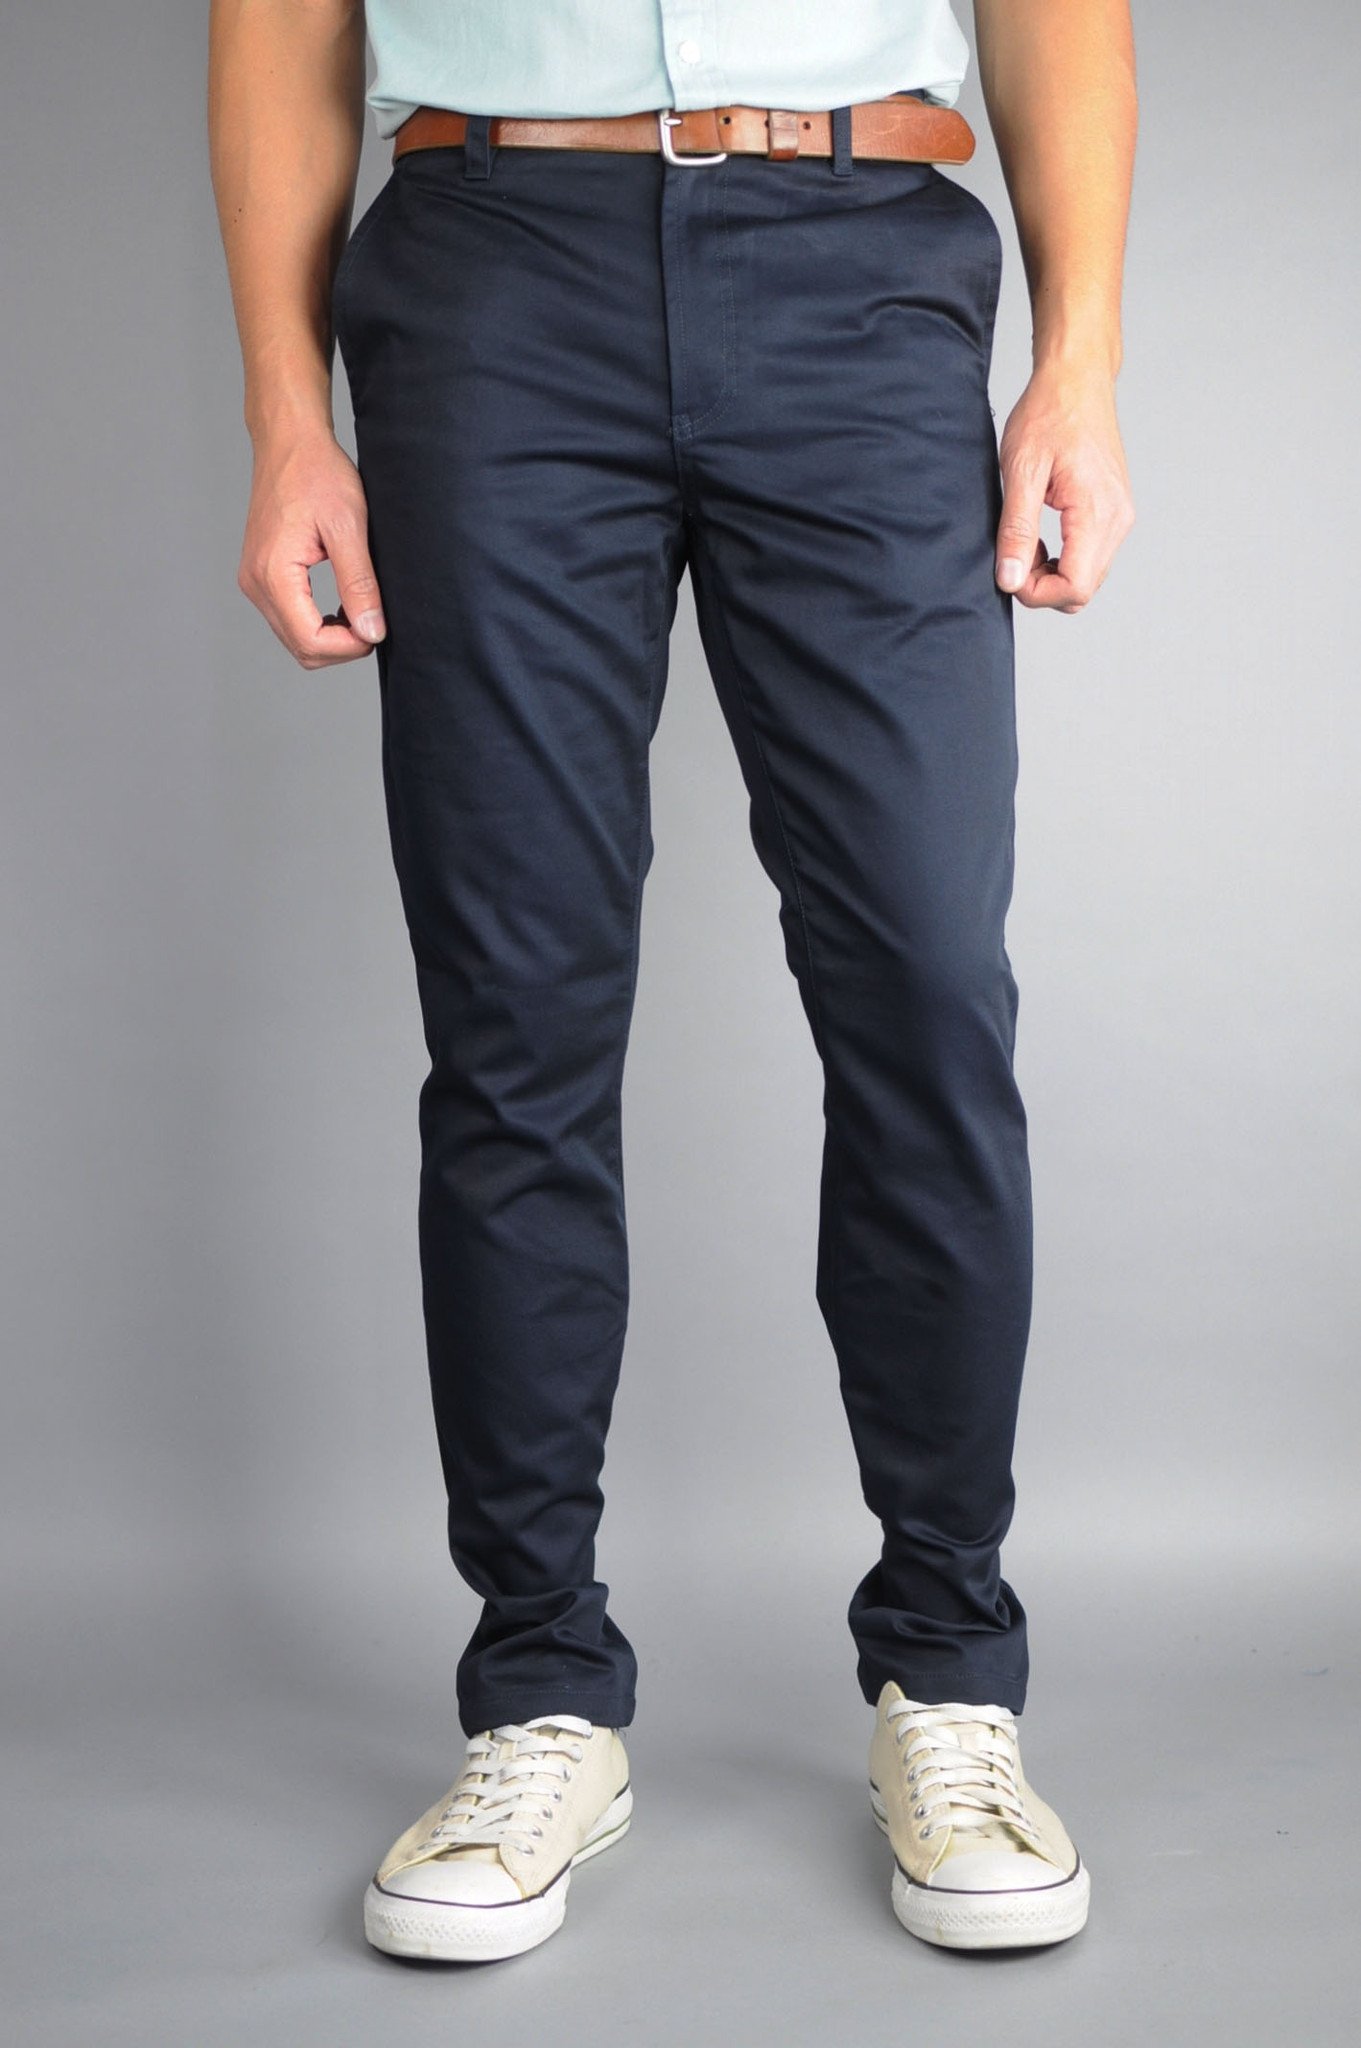 Pants regular fit cotton chinos for mens  Quality brand Europann